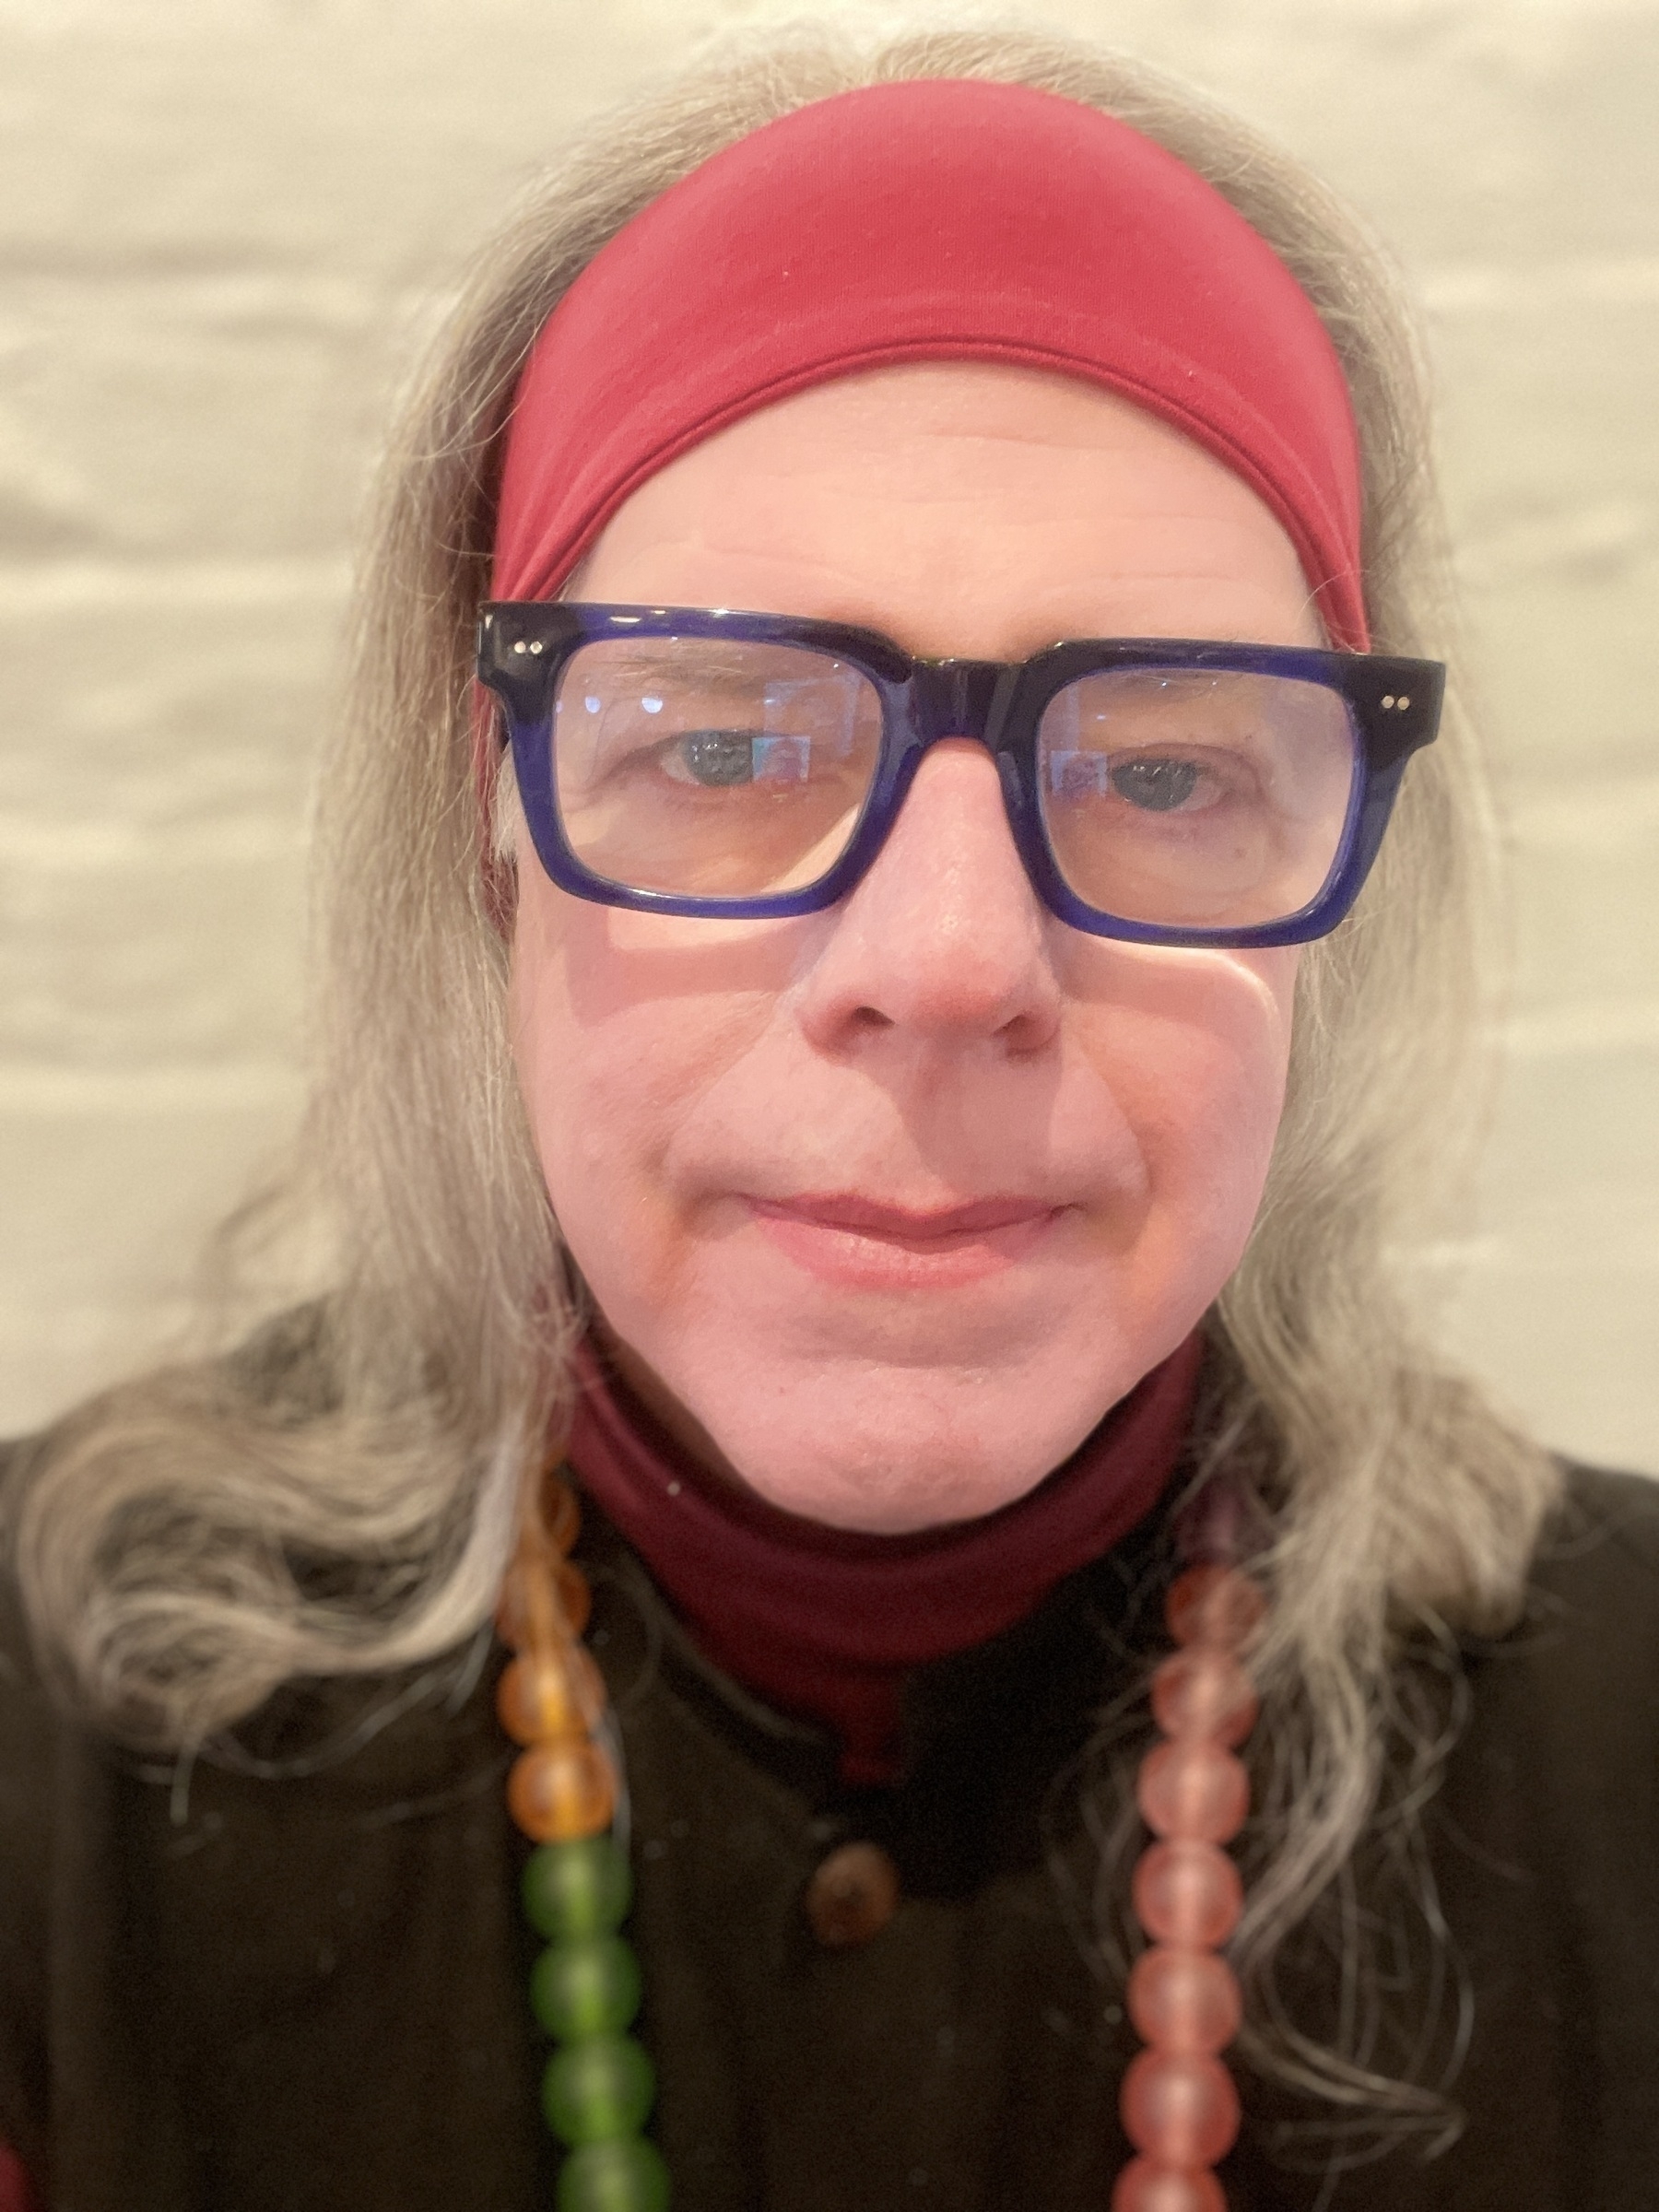 Self portrait trans-feminine man with hair down to shoulders, colored translucent bead necklace pink headband, blue frame glasses and pink lipstick.